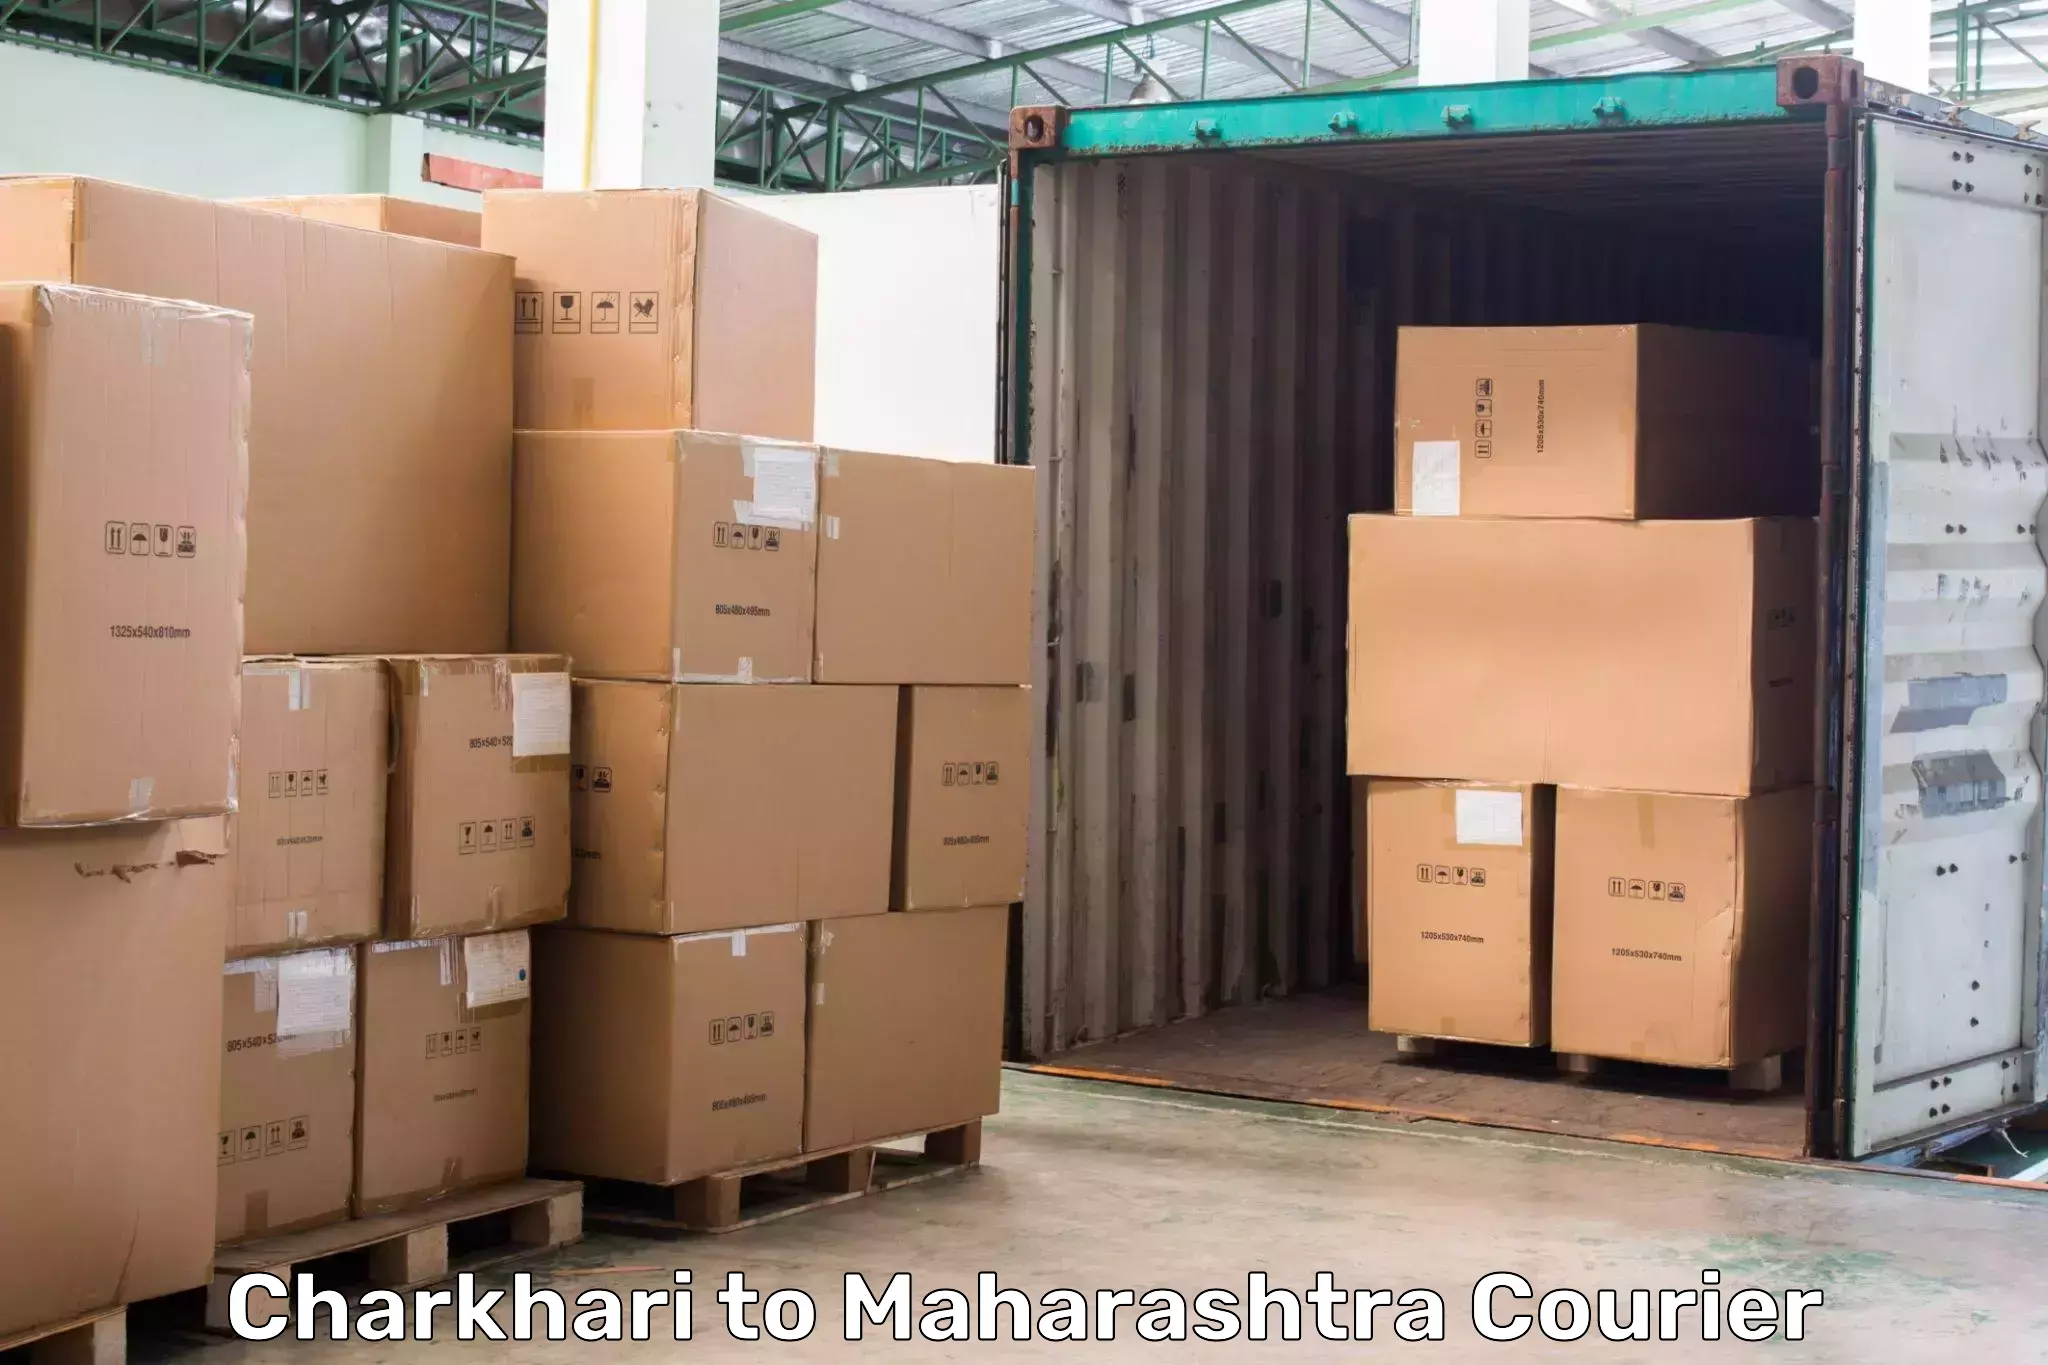 Courier service efficiency Charkhari to Andheri